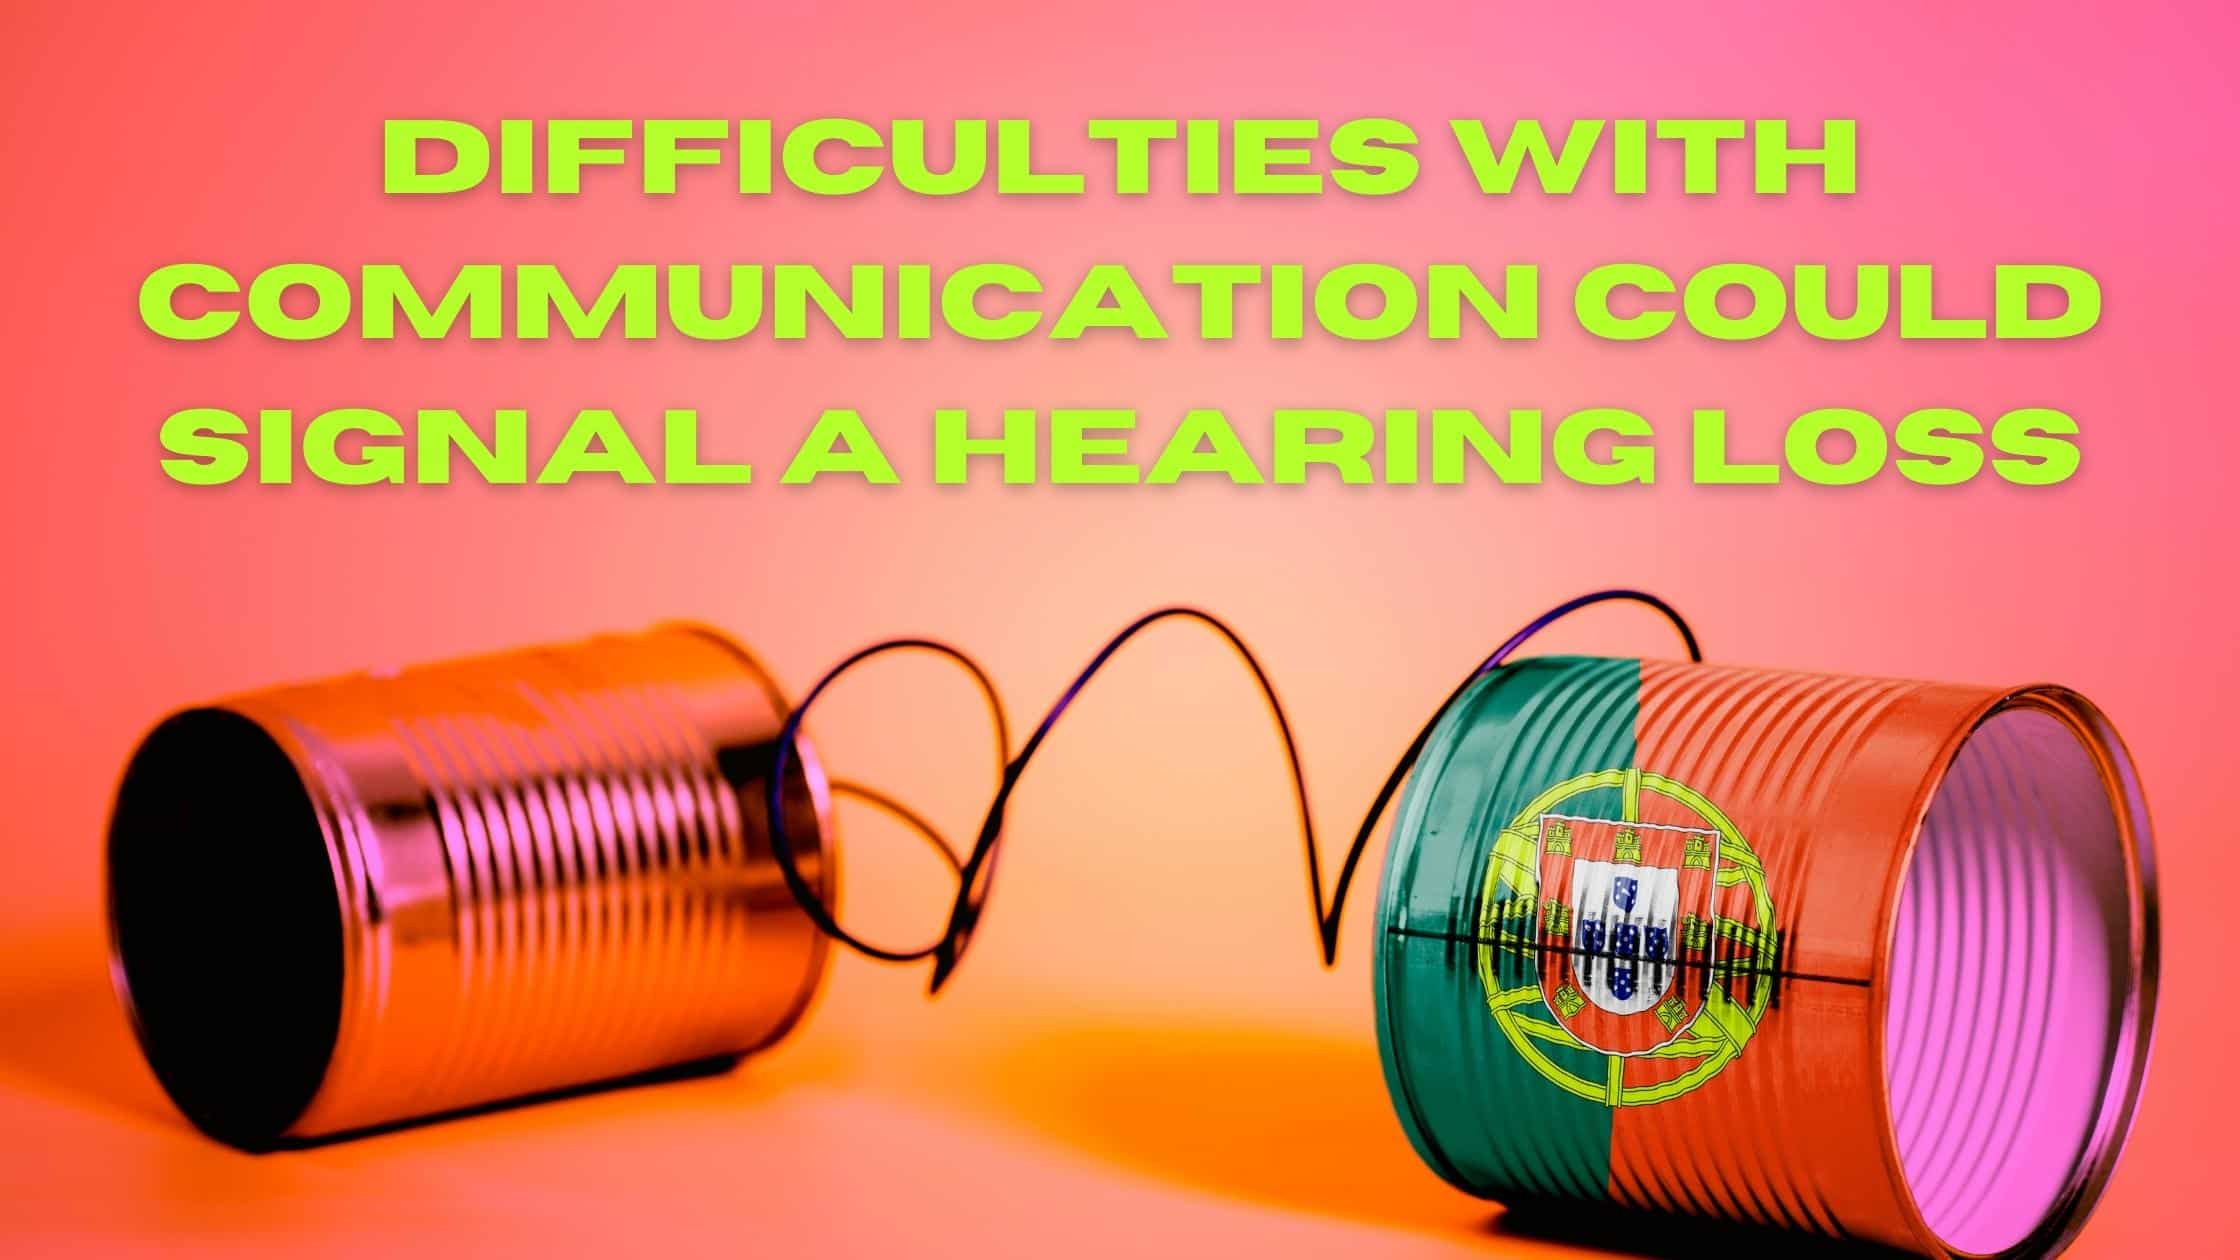 Difficulties with Communication Could Signal a Hearing Loss